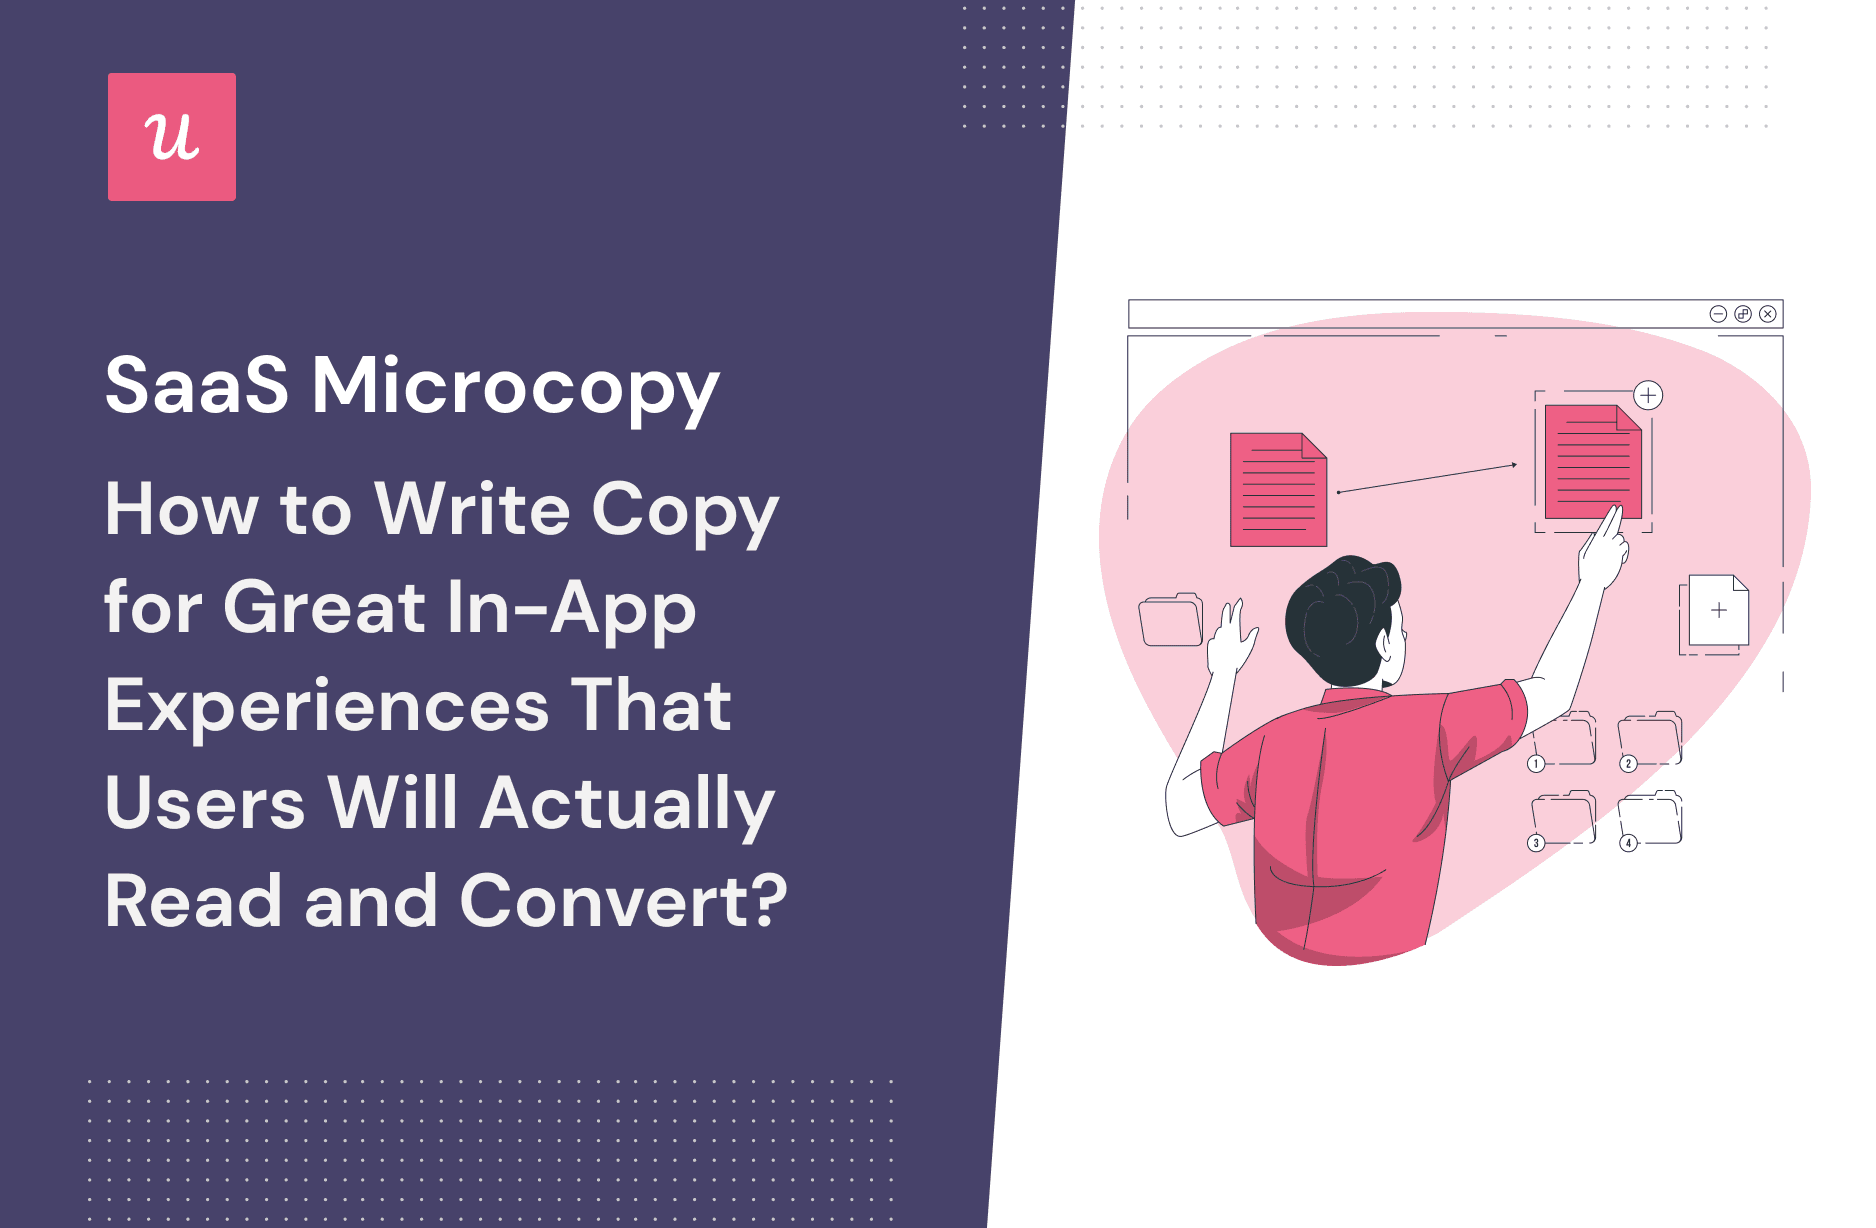 How to Write Copy for Great In-app Experiences that Users Will Actually Read and Convert?